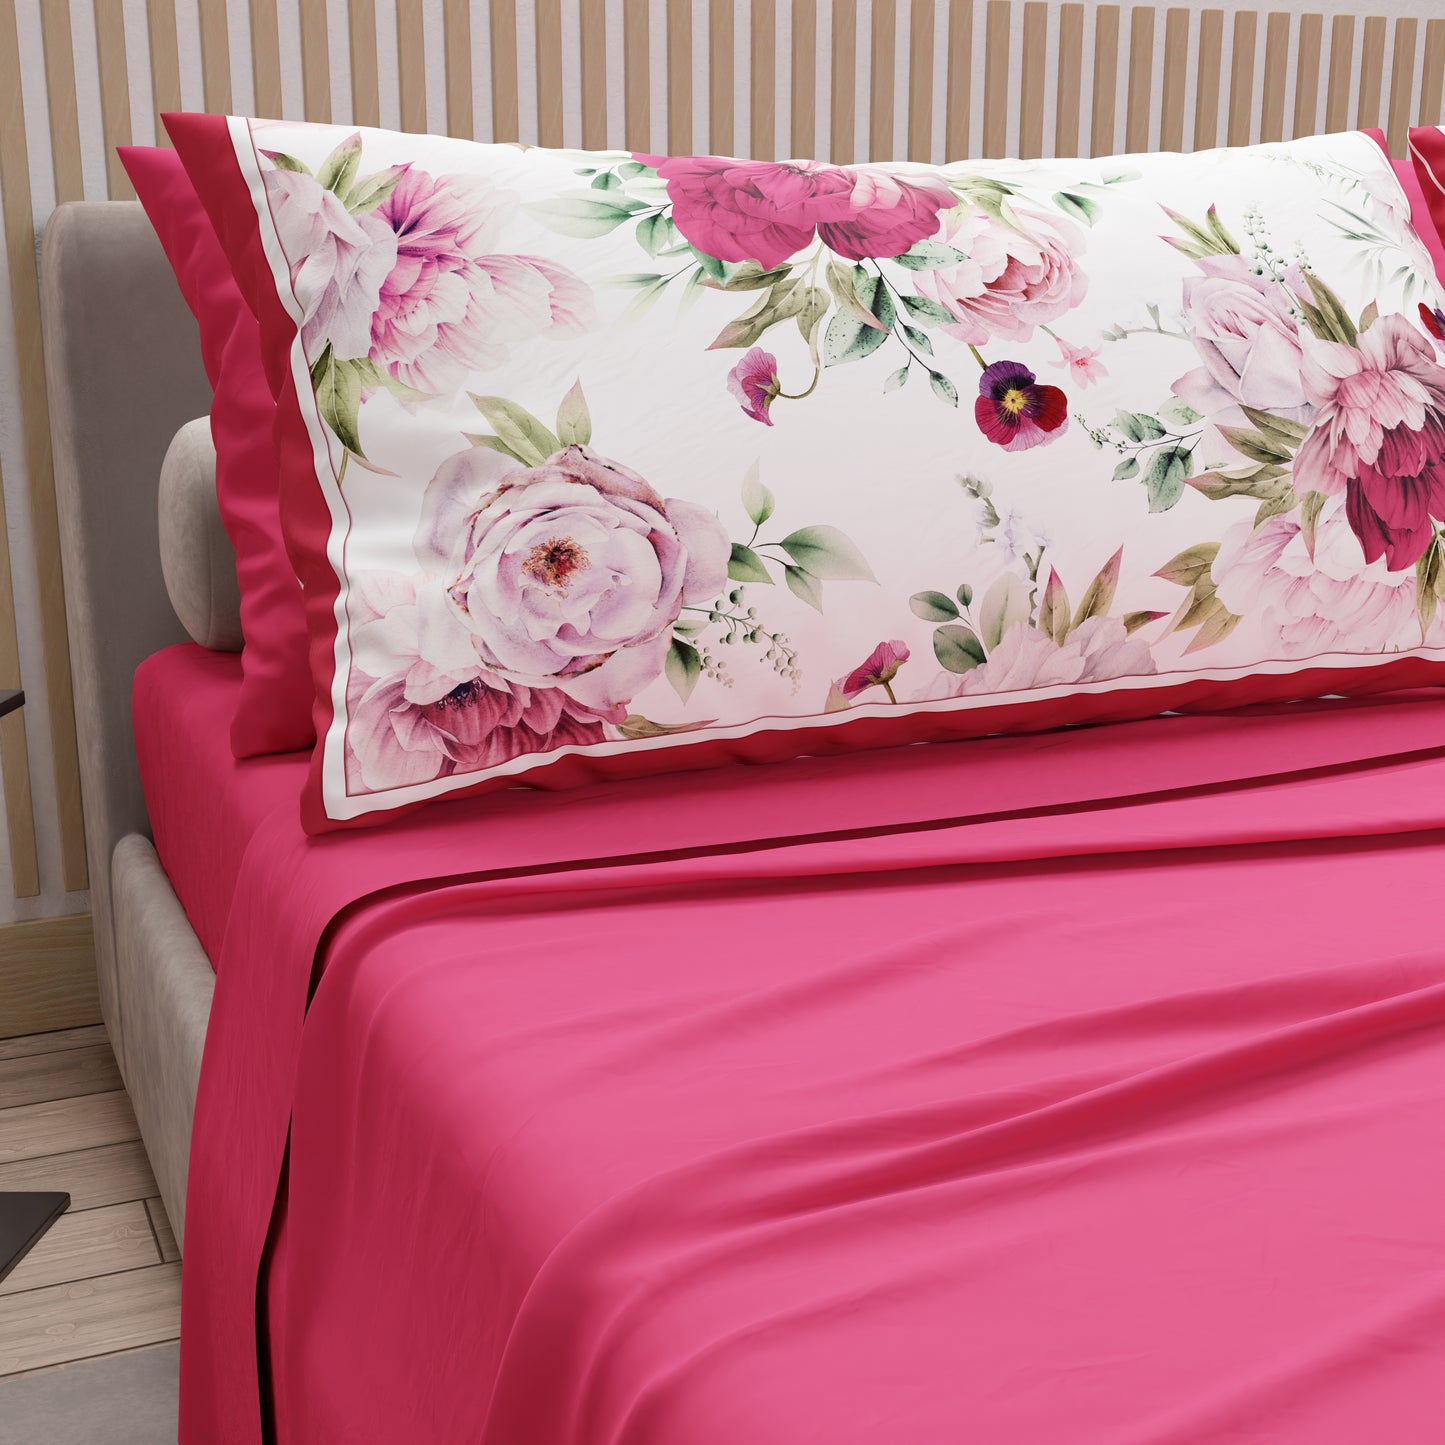 Cotton Sheets, Bed Set with Floral Digital Print Pillowcases 08